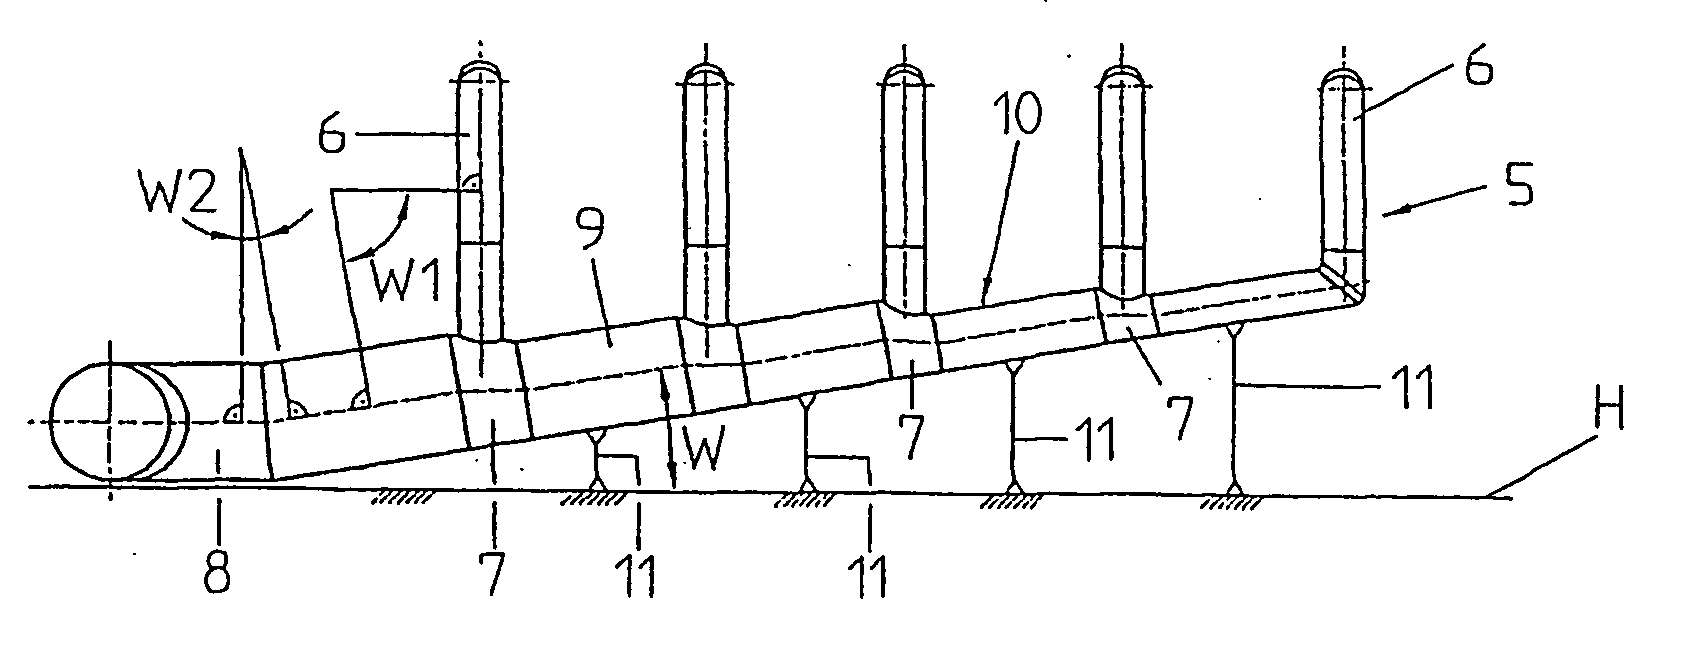 Exhaust-steam pipeline for a steam power plant